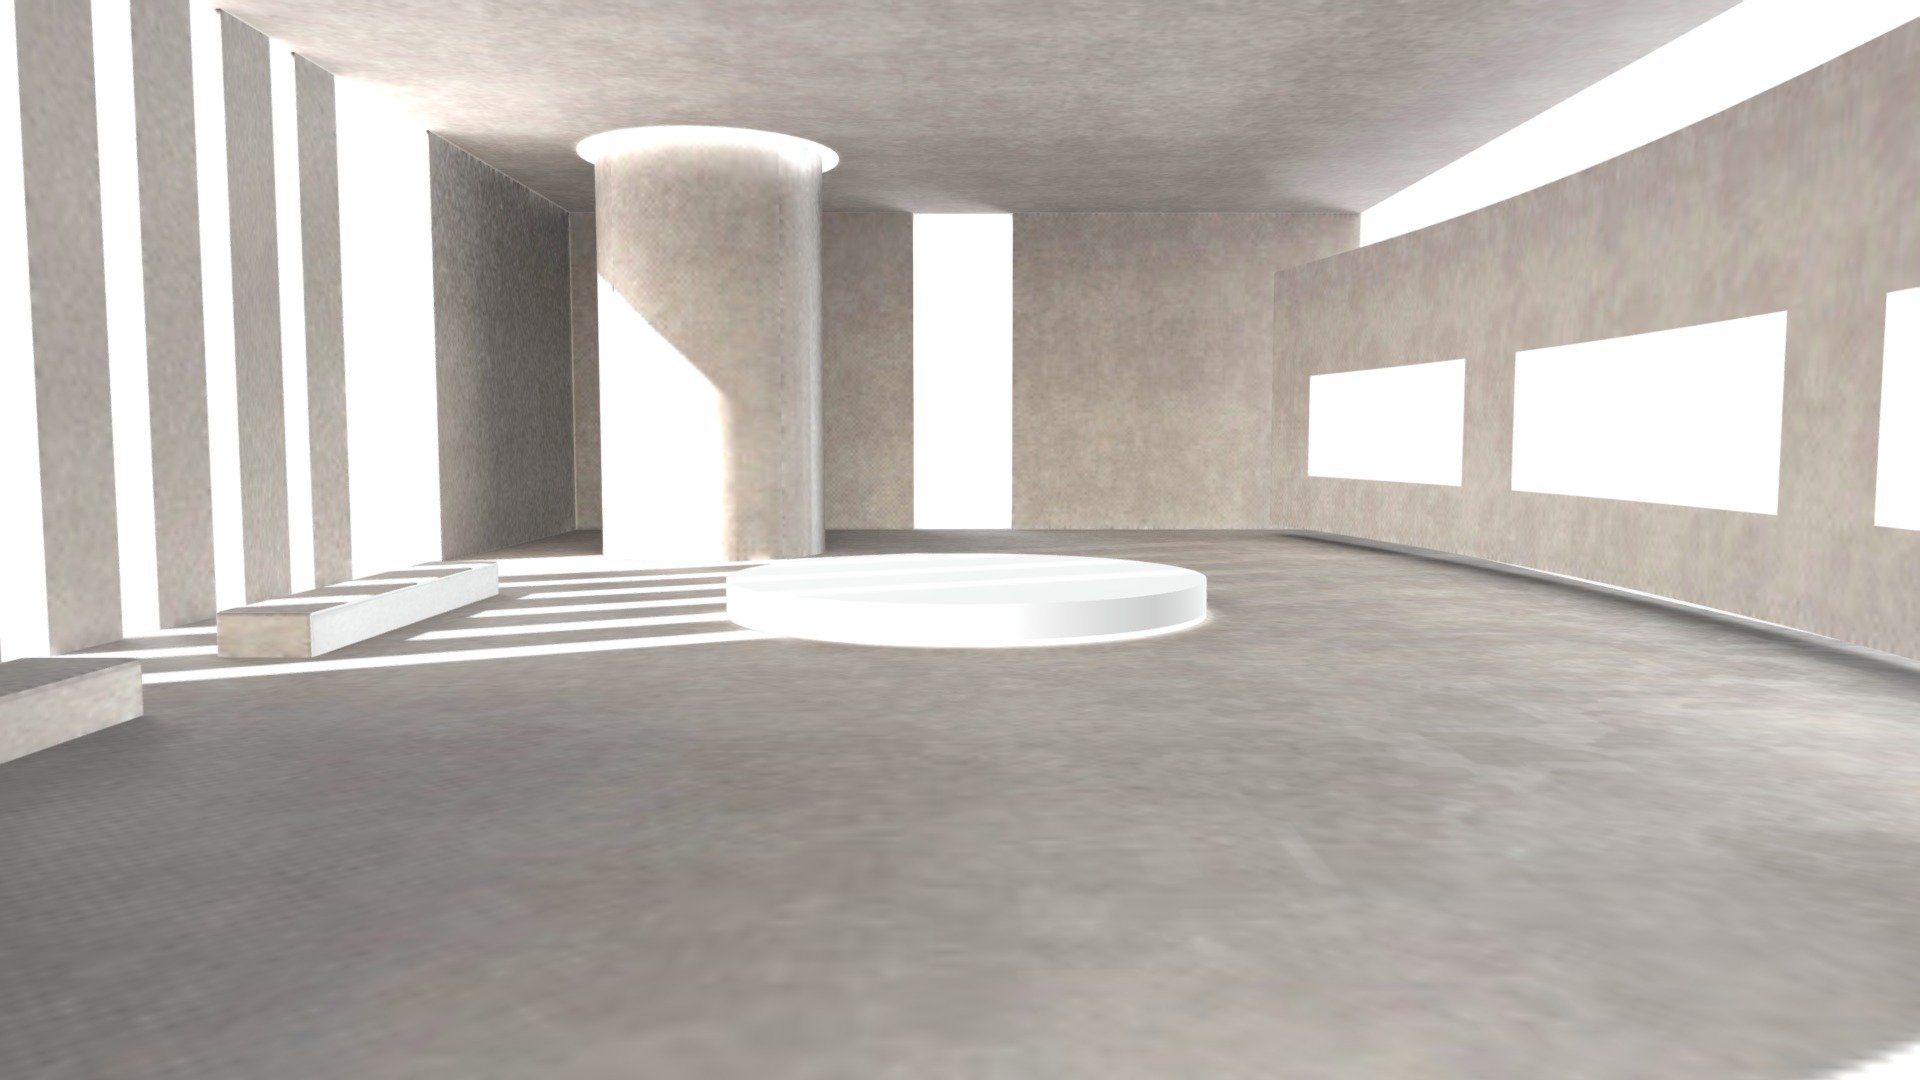 Minimalist gallery space with stucco finishing.

Optimized glb data for VR and metaverse.

-Data format: glb

-Textures: 1K to 2K / Baked( for main floor, walls, furnitures, Not for all)

-Scaled to real world dimension - White Gallery with stucco finishing - 3D model by BIUM (@studiobium) 3d model